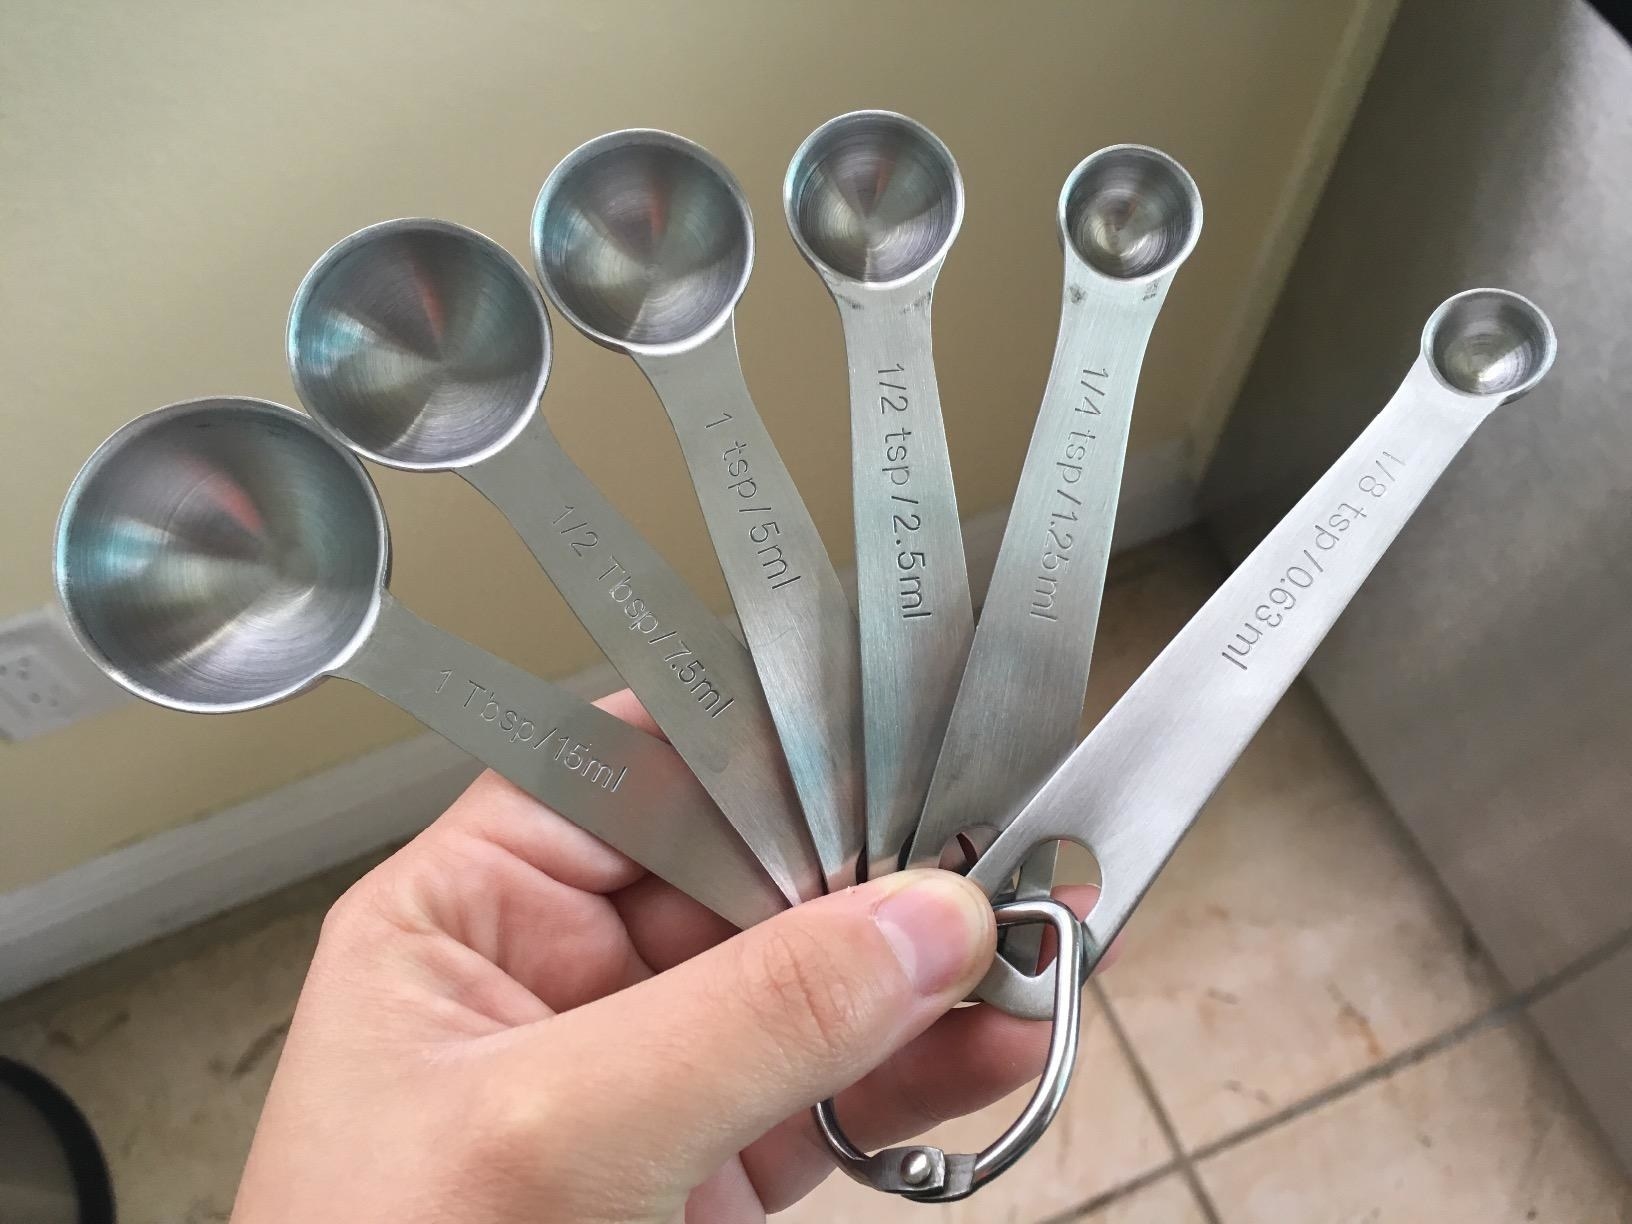 Review photo of the measuring spoons